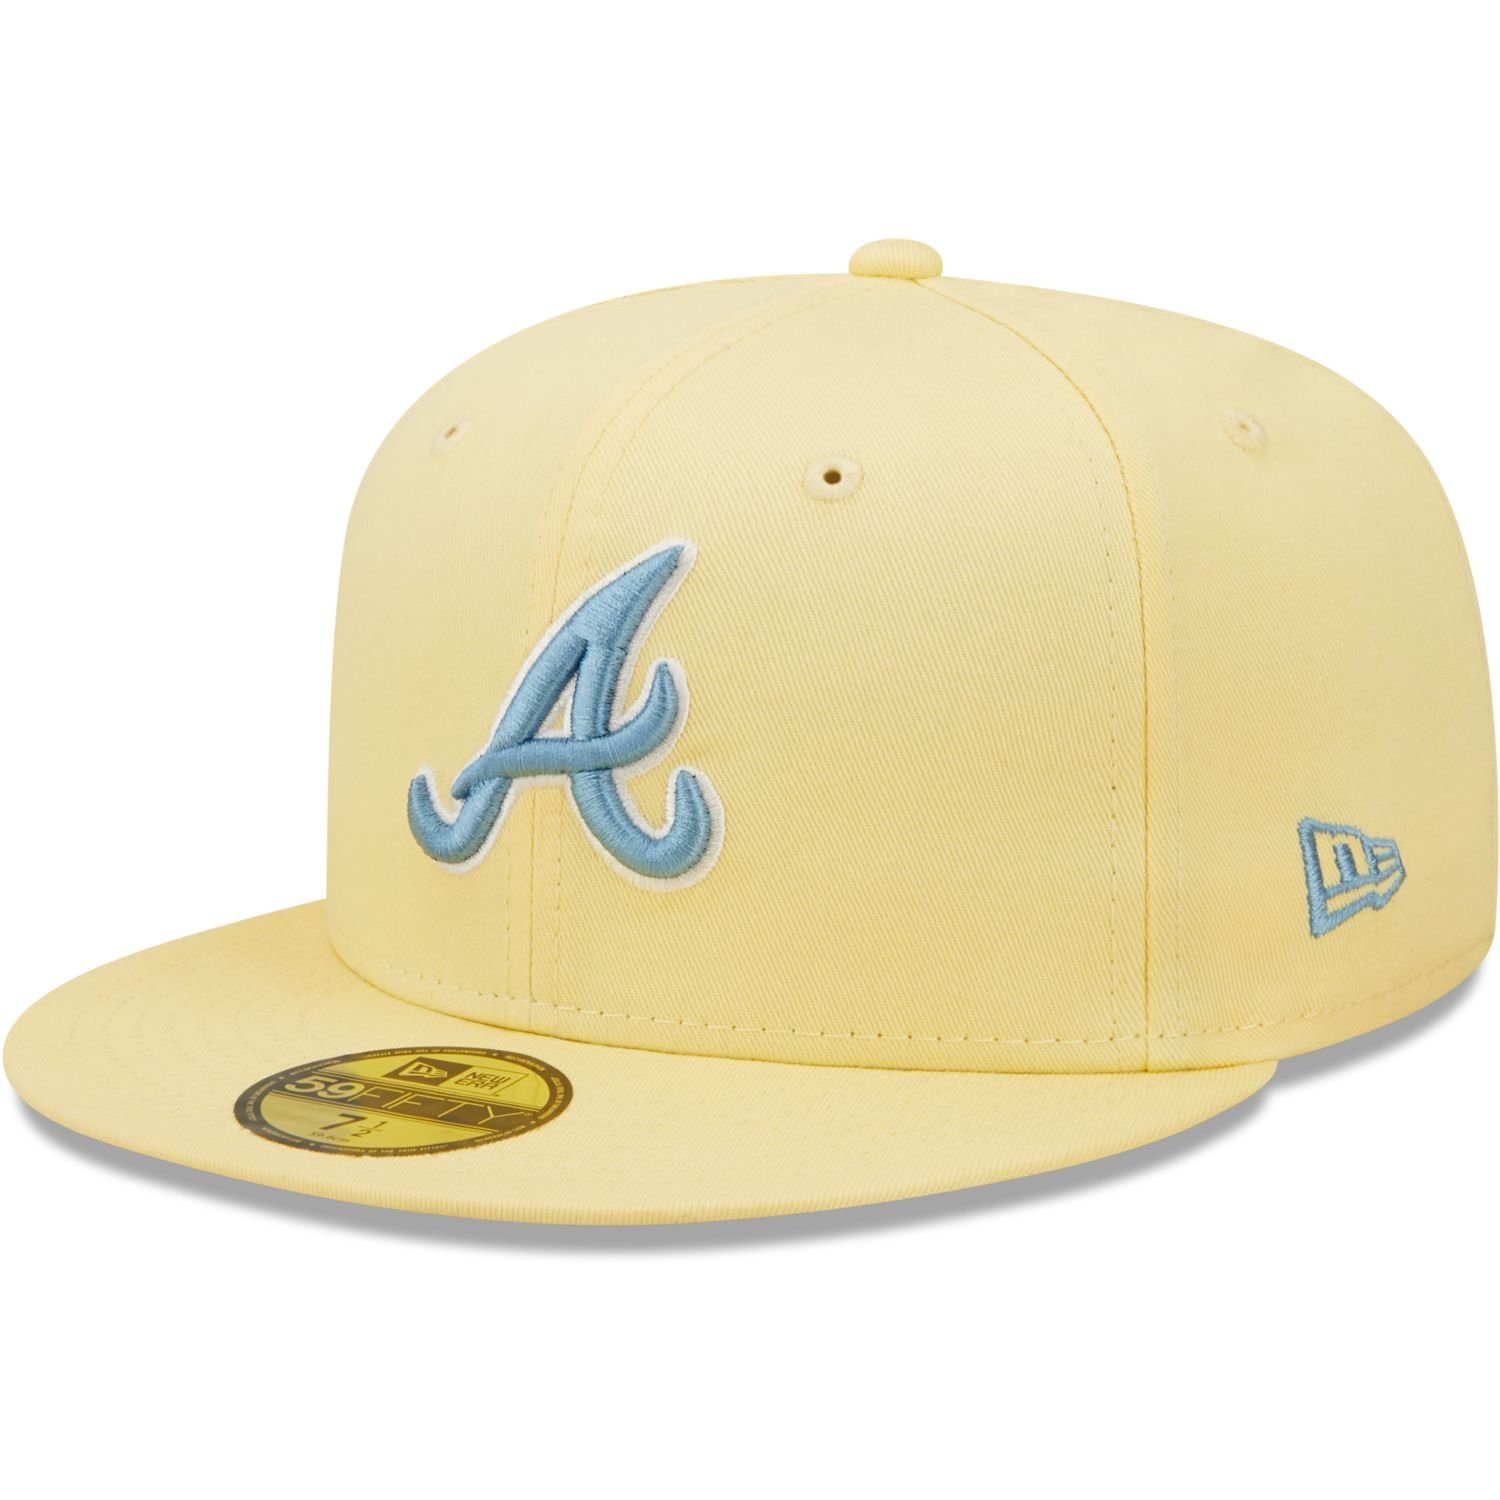 Era 59Fifty Cap New Braves Fitted COOPERSTOWN Atlanta